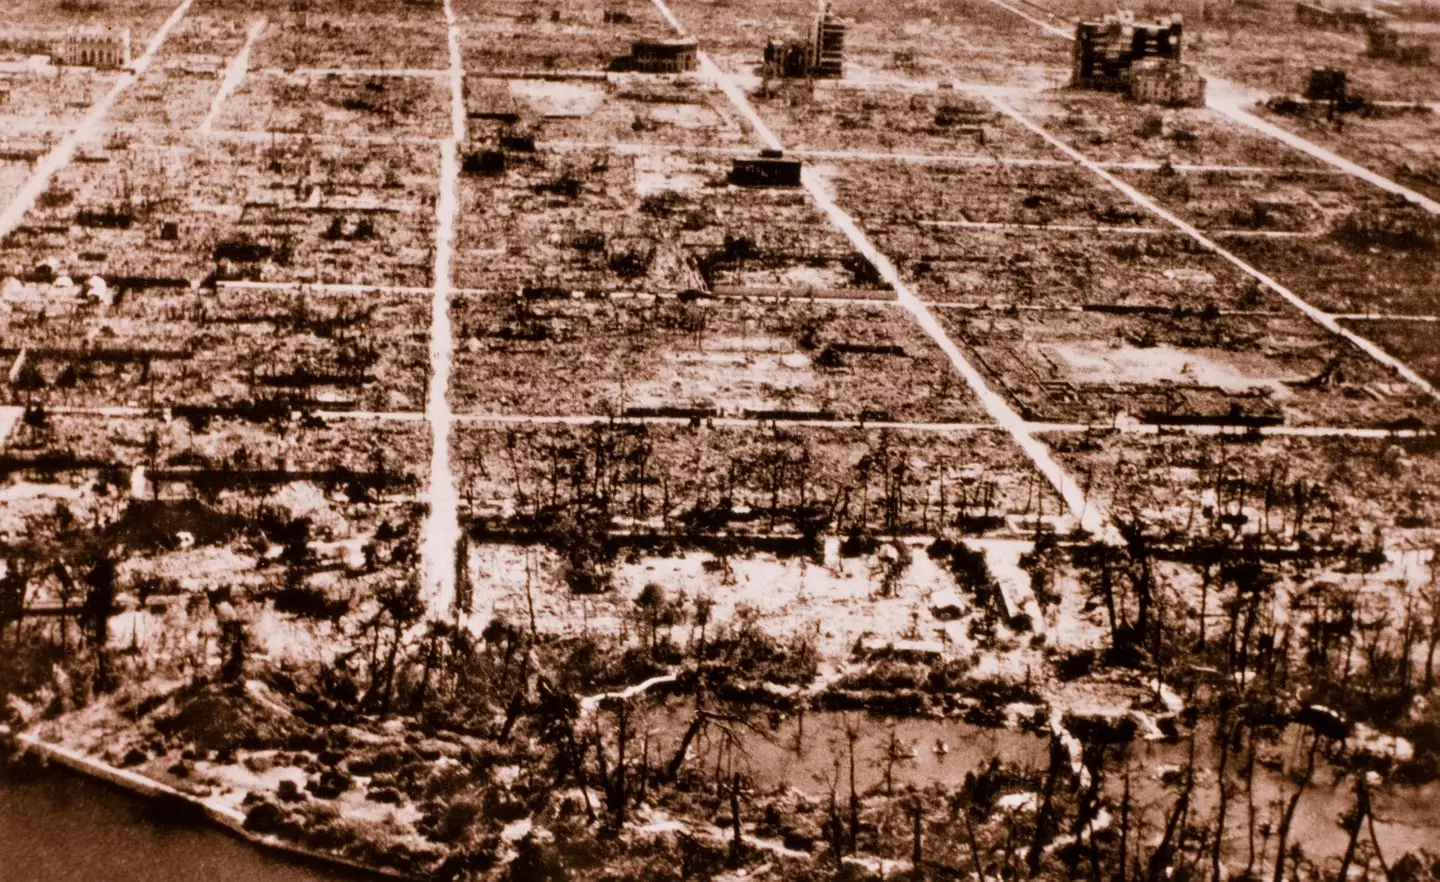 Hiroshima was completely destroyed in the blast.